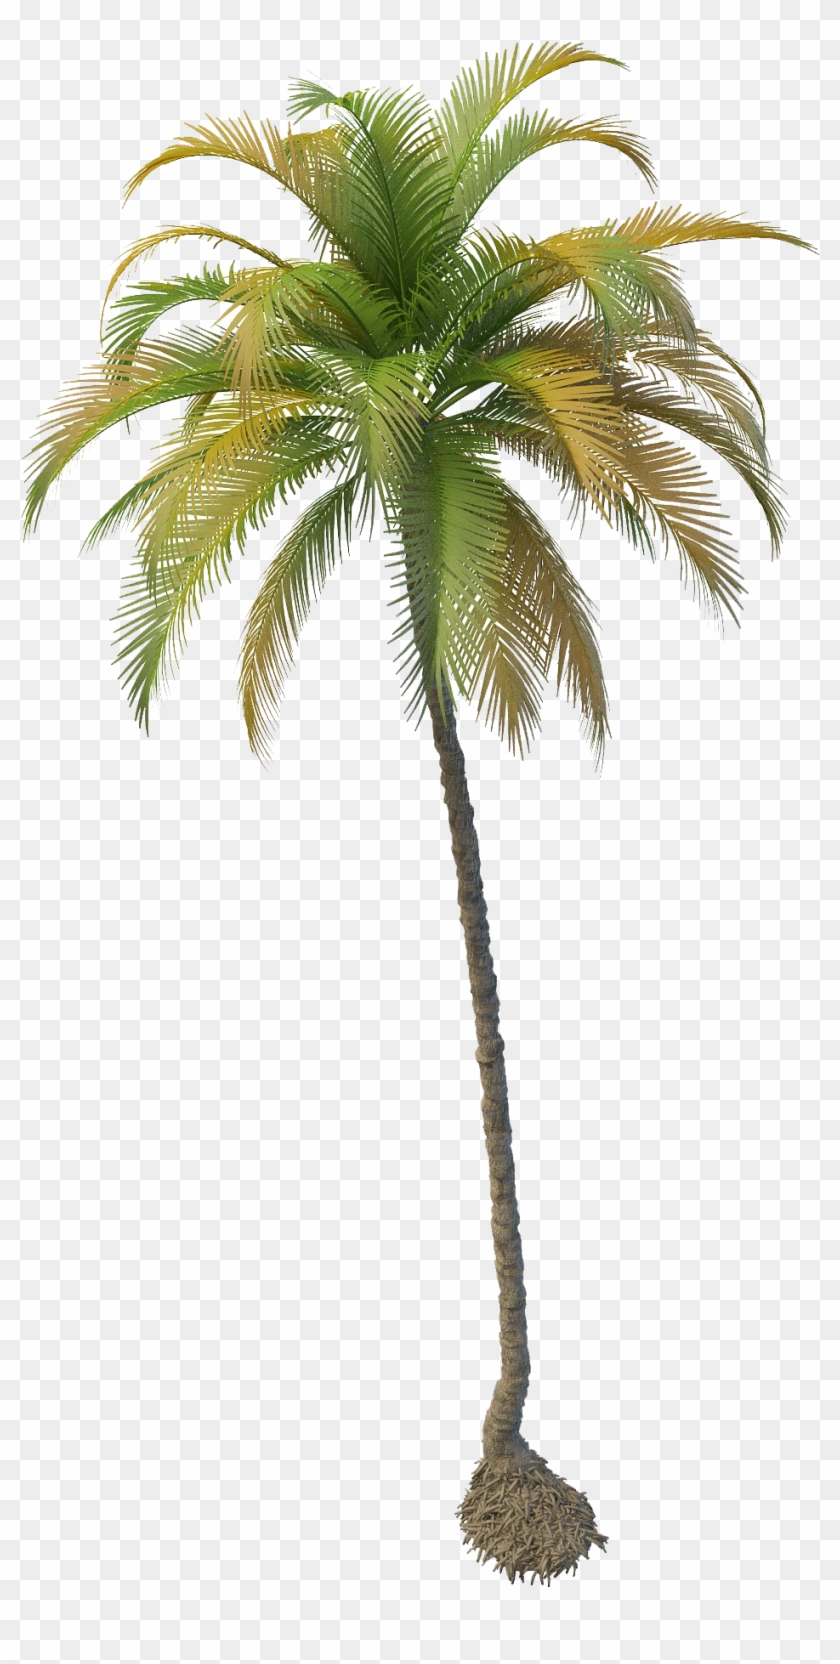 Coconut Tree Png File Clipart #322341